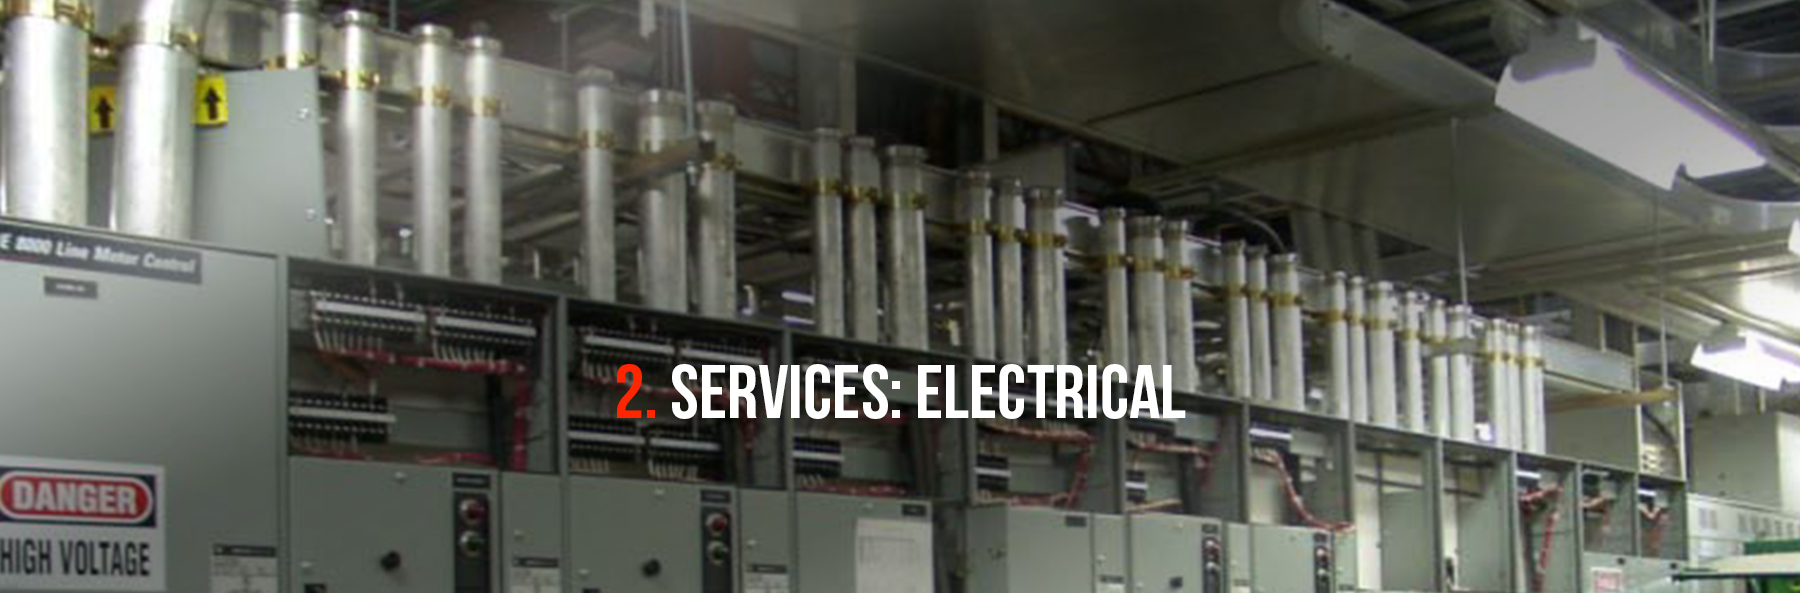 Services: Electrical